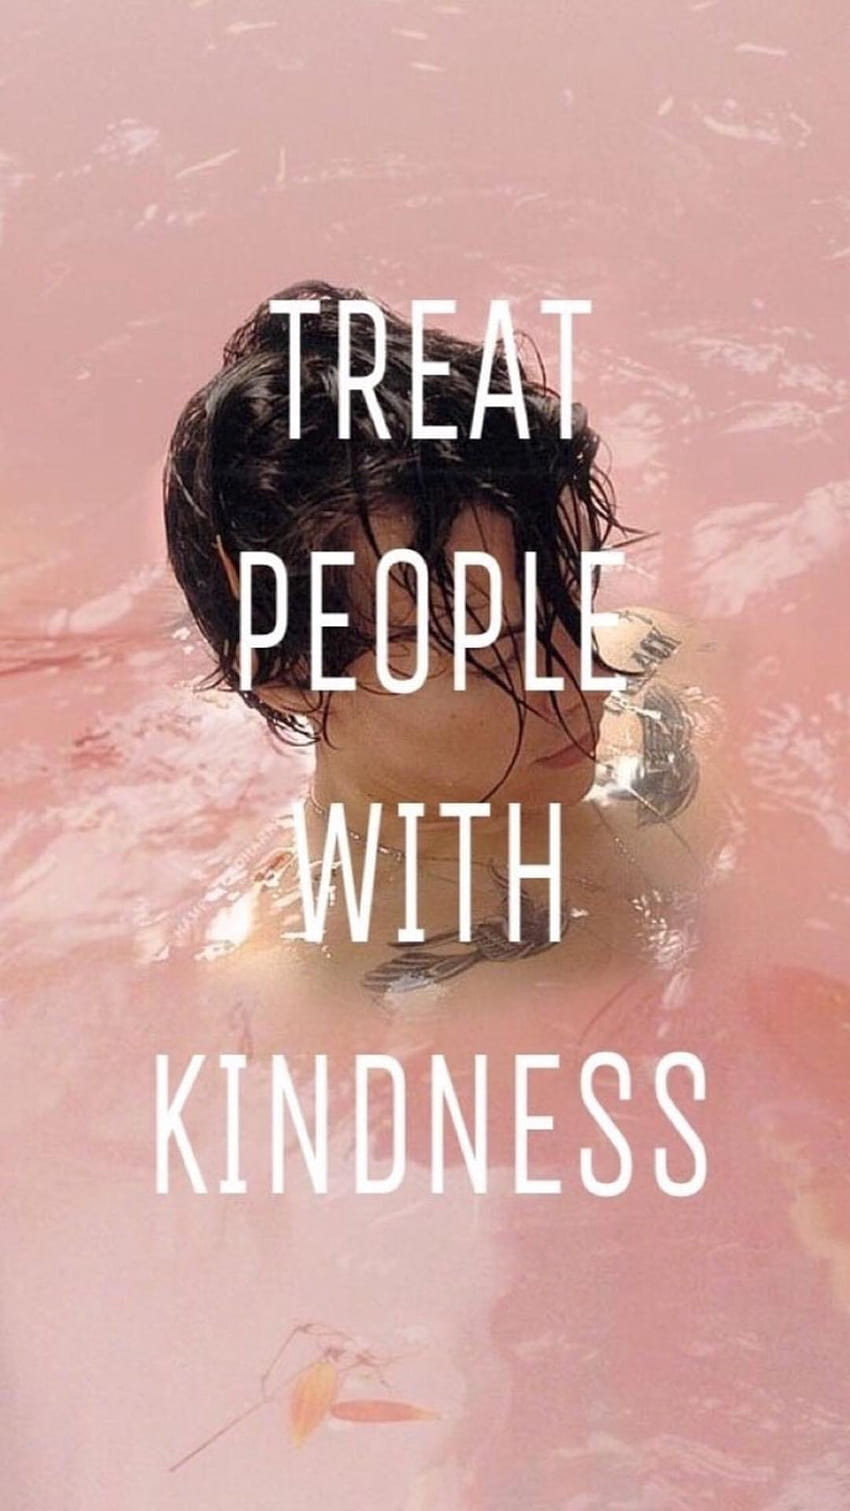 Steph on Harry Styles, treat people with kindness HD phone wallpaper